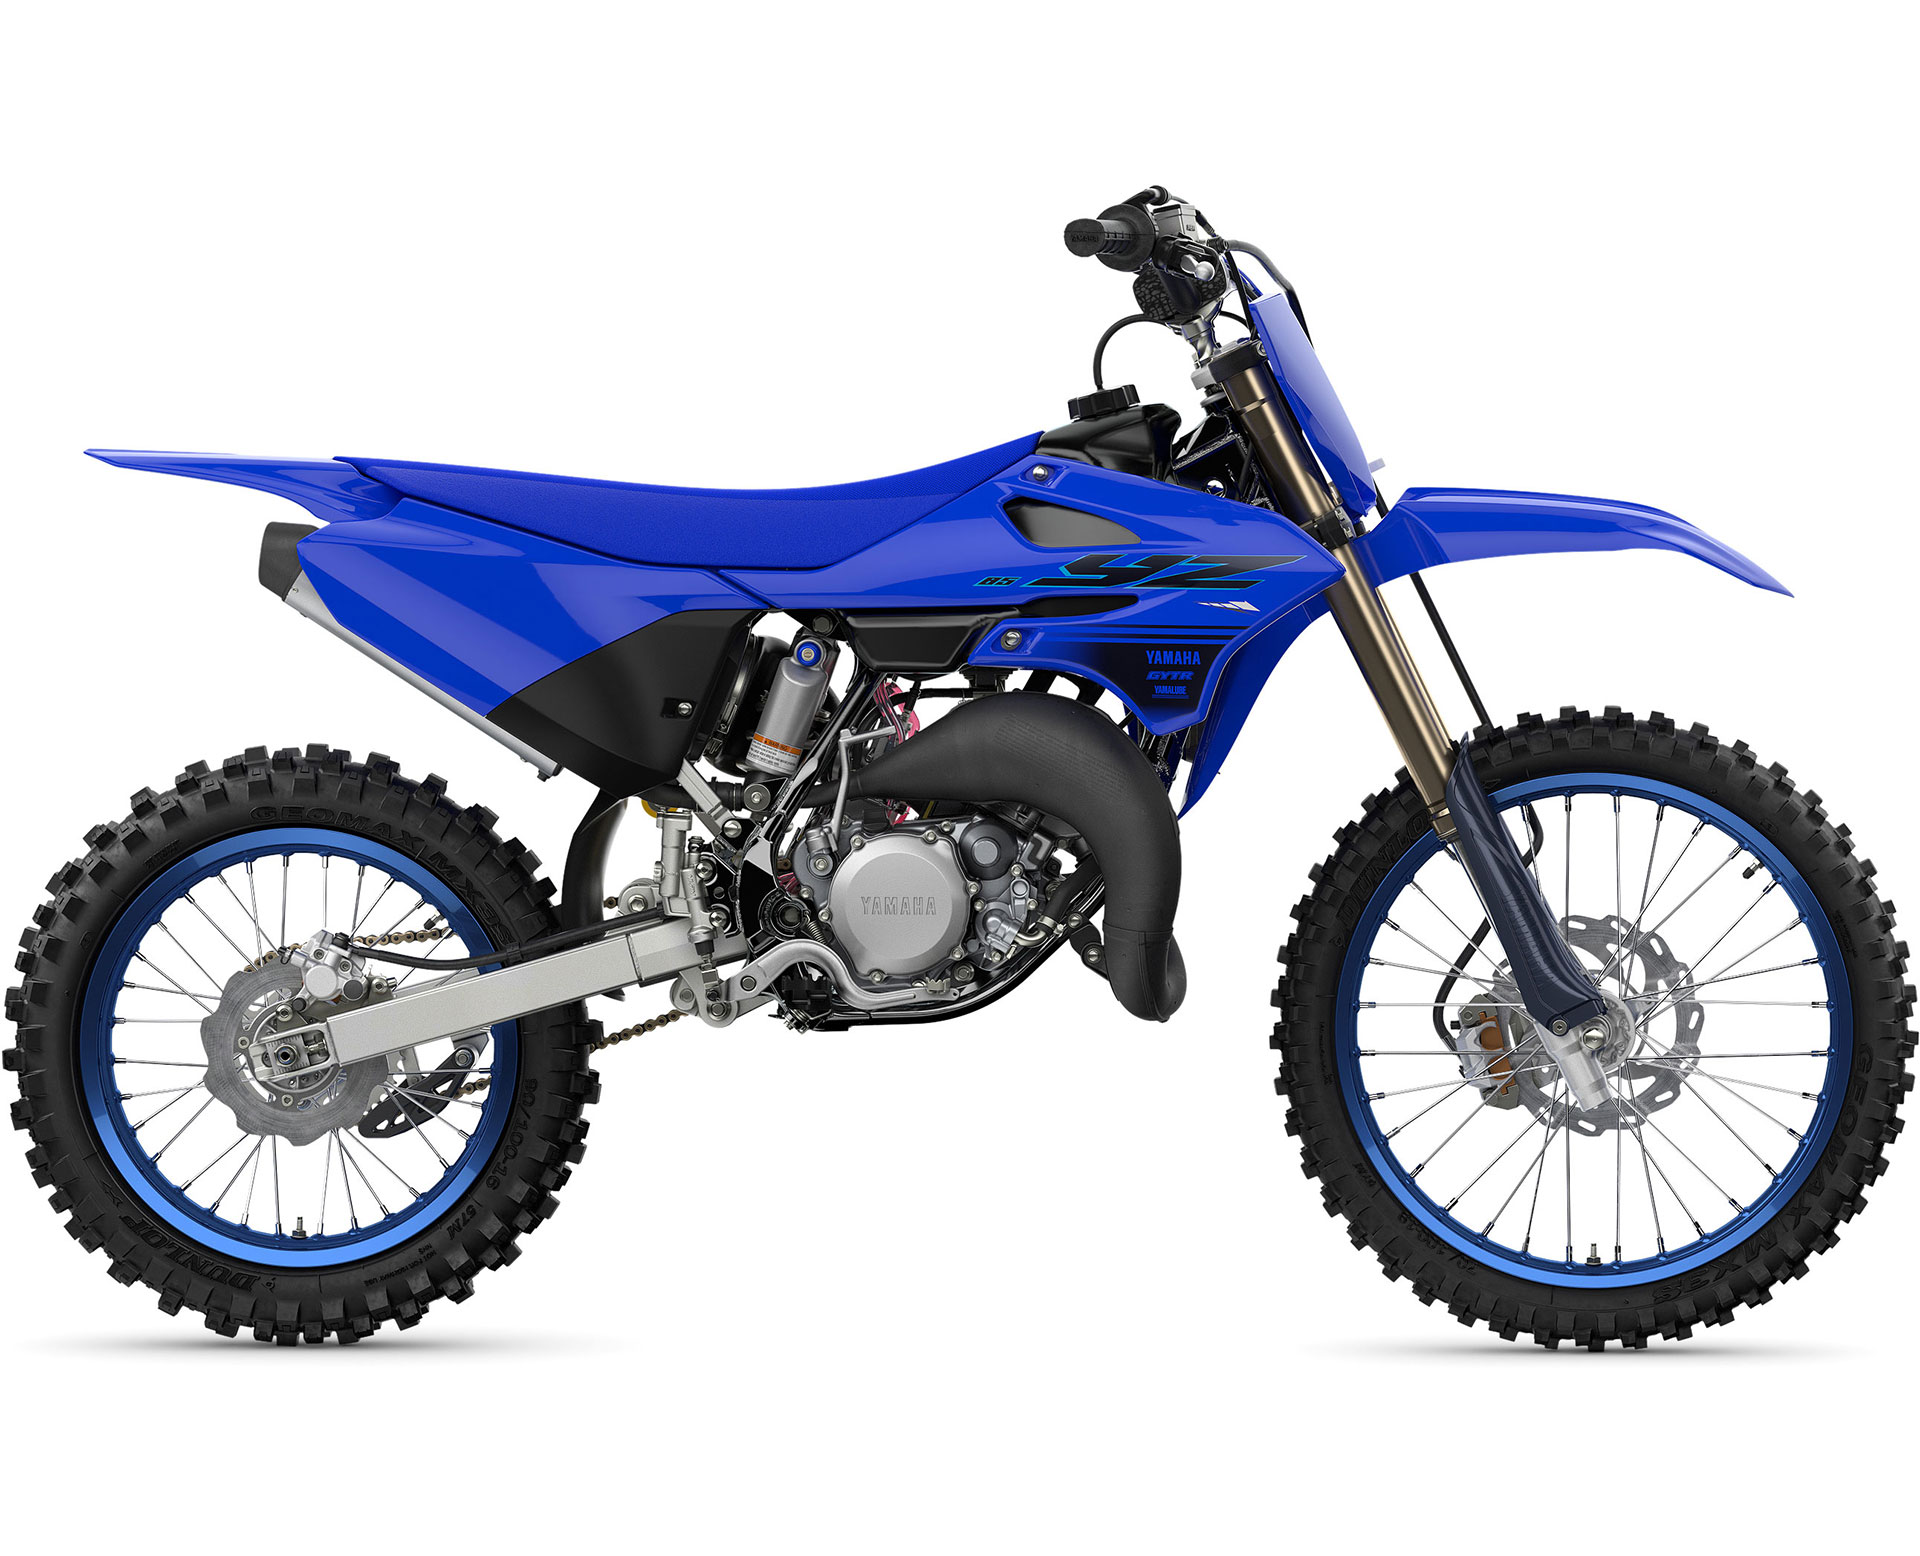 Thumbnail of your customized YZ85LW 2024